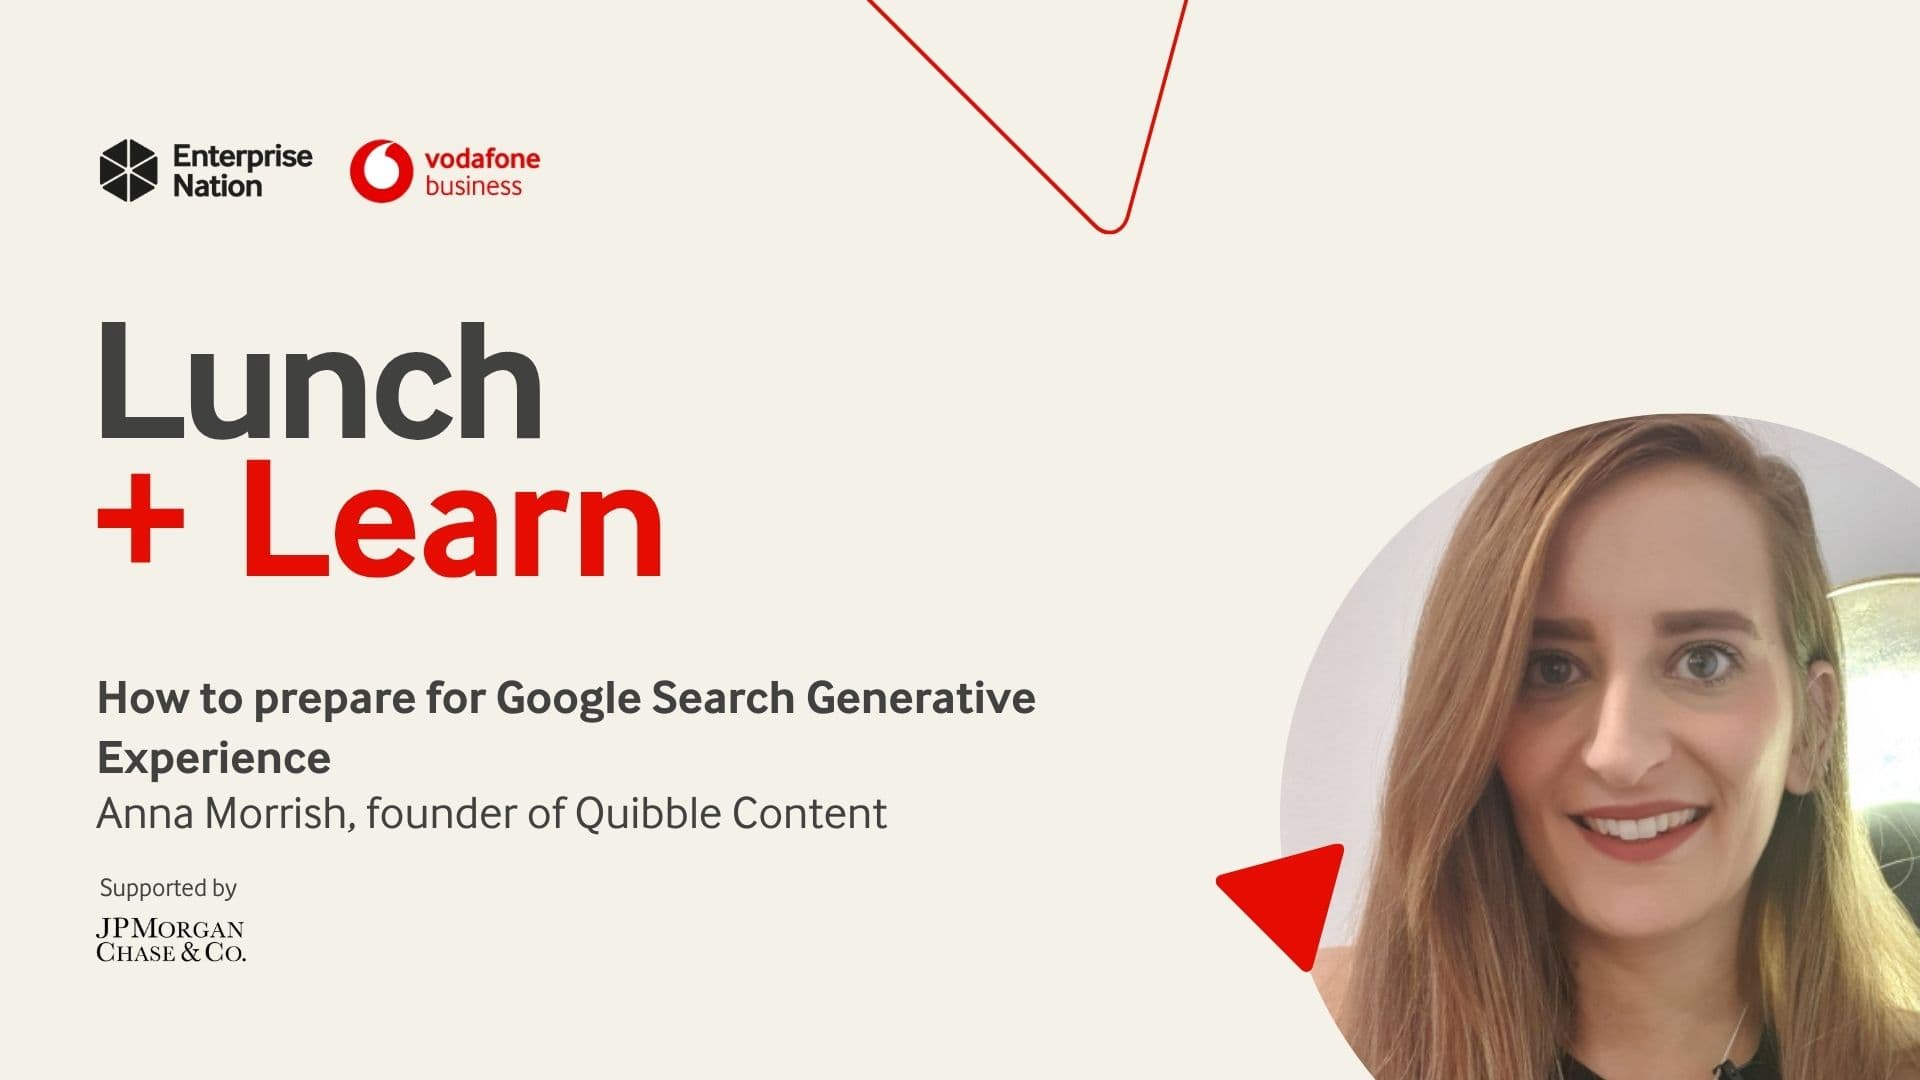 Lunch and Learn: How to prepare for Google Search Generative Experience